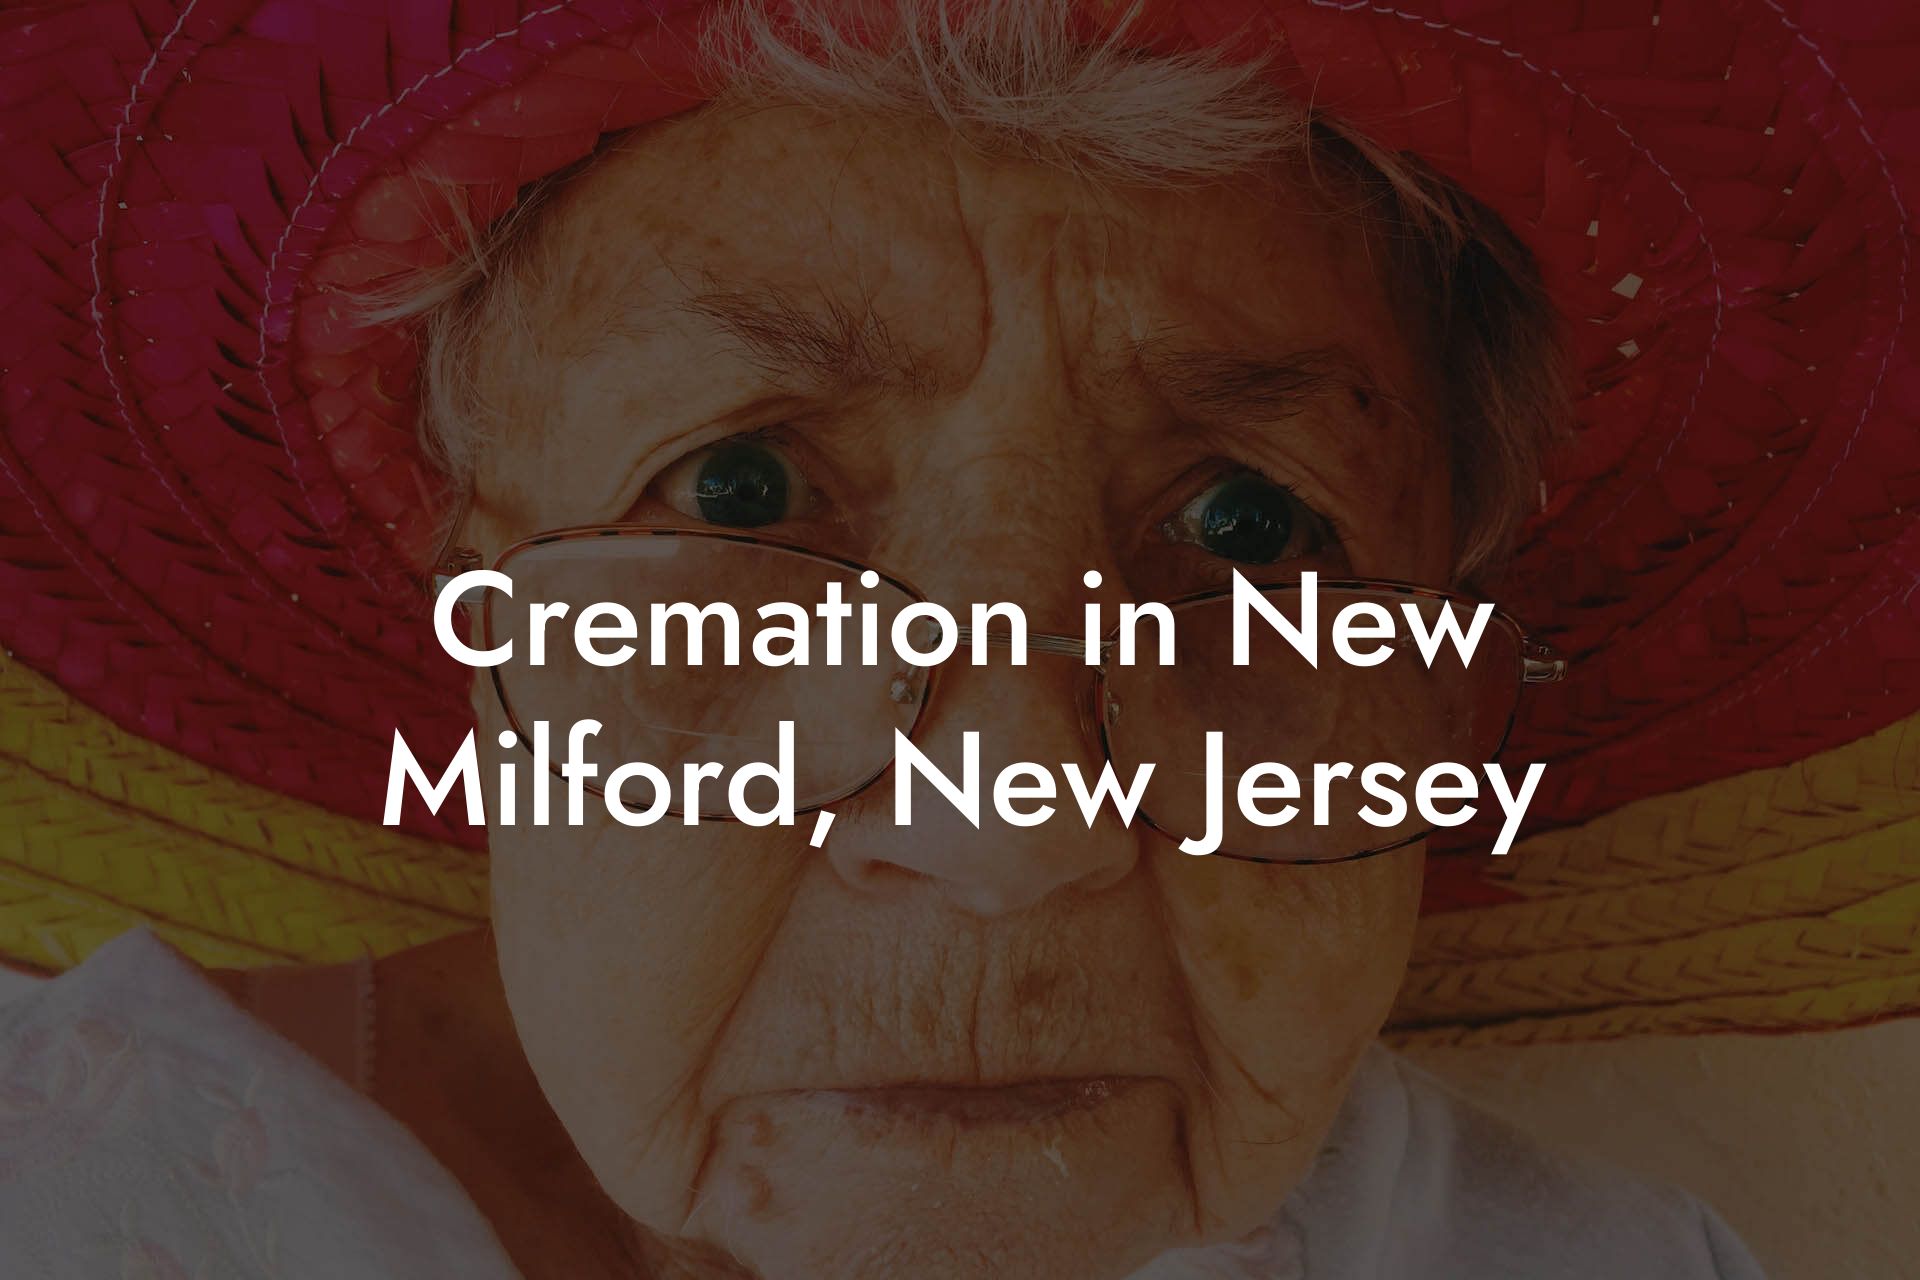 Cremation in New Milford, New Jersey